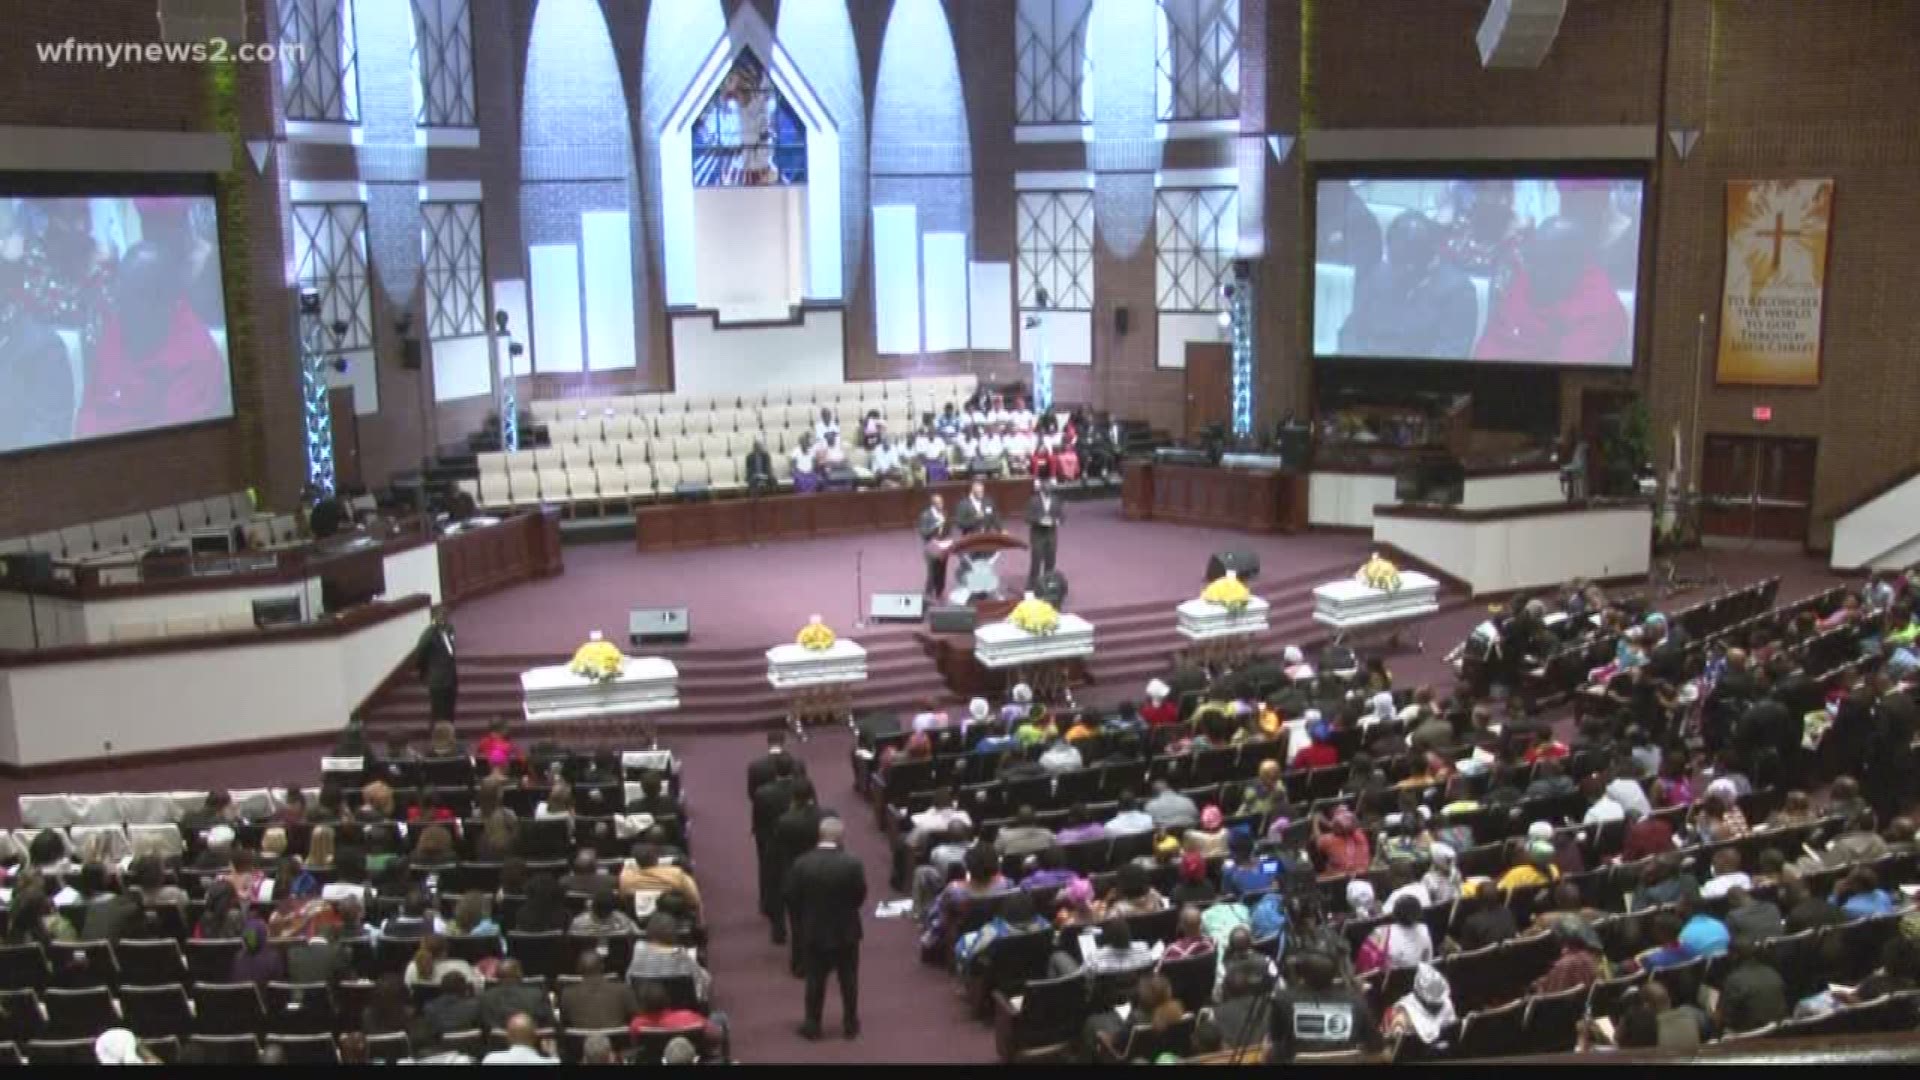 Celebration Of Life After Deadly Fire